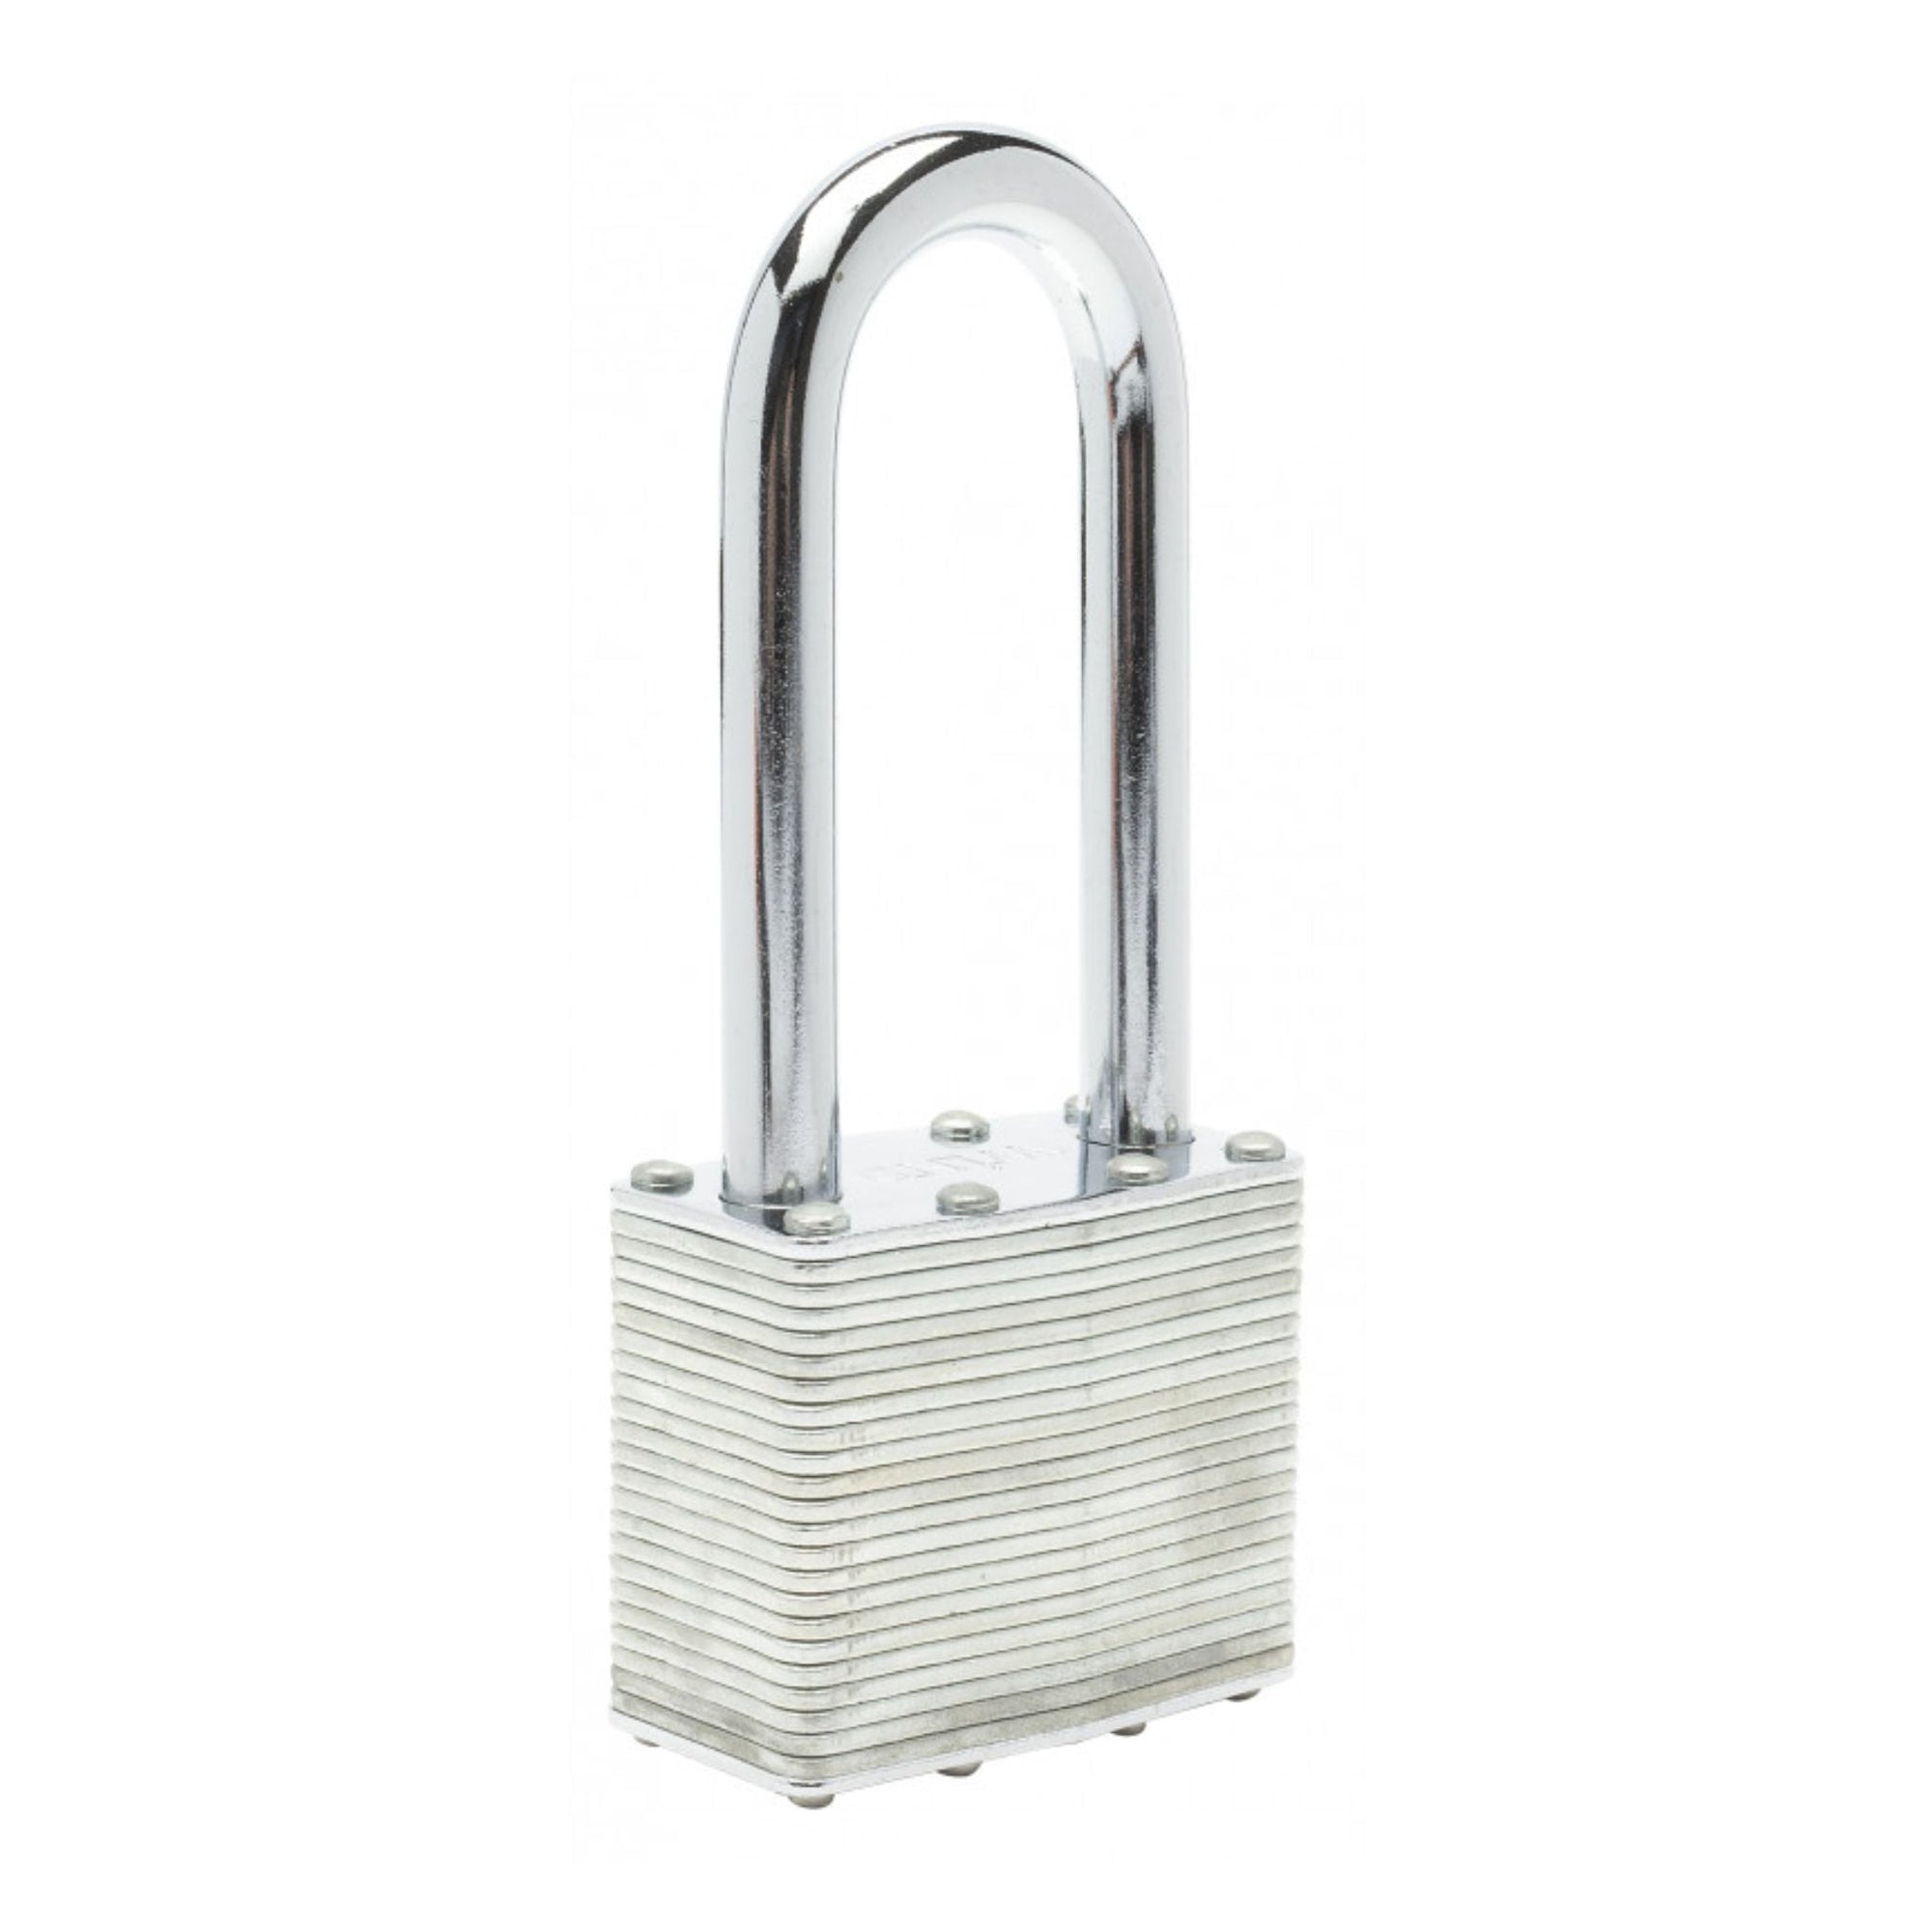 Zephyr Lock Laminated Steel Combination Locks 18050 Padlock with 2.5-Inch Long Shackle - The Lock Source